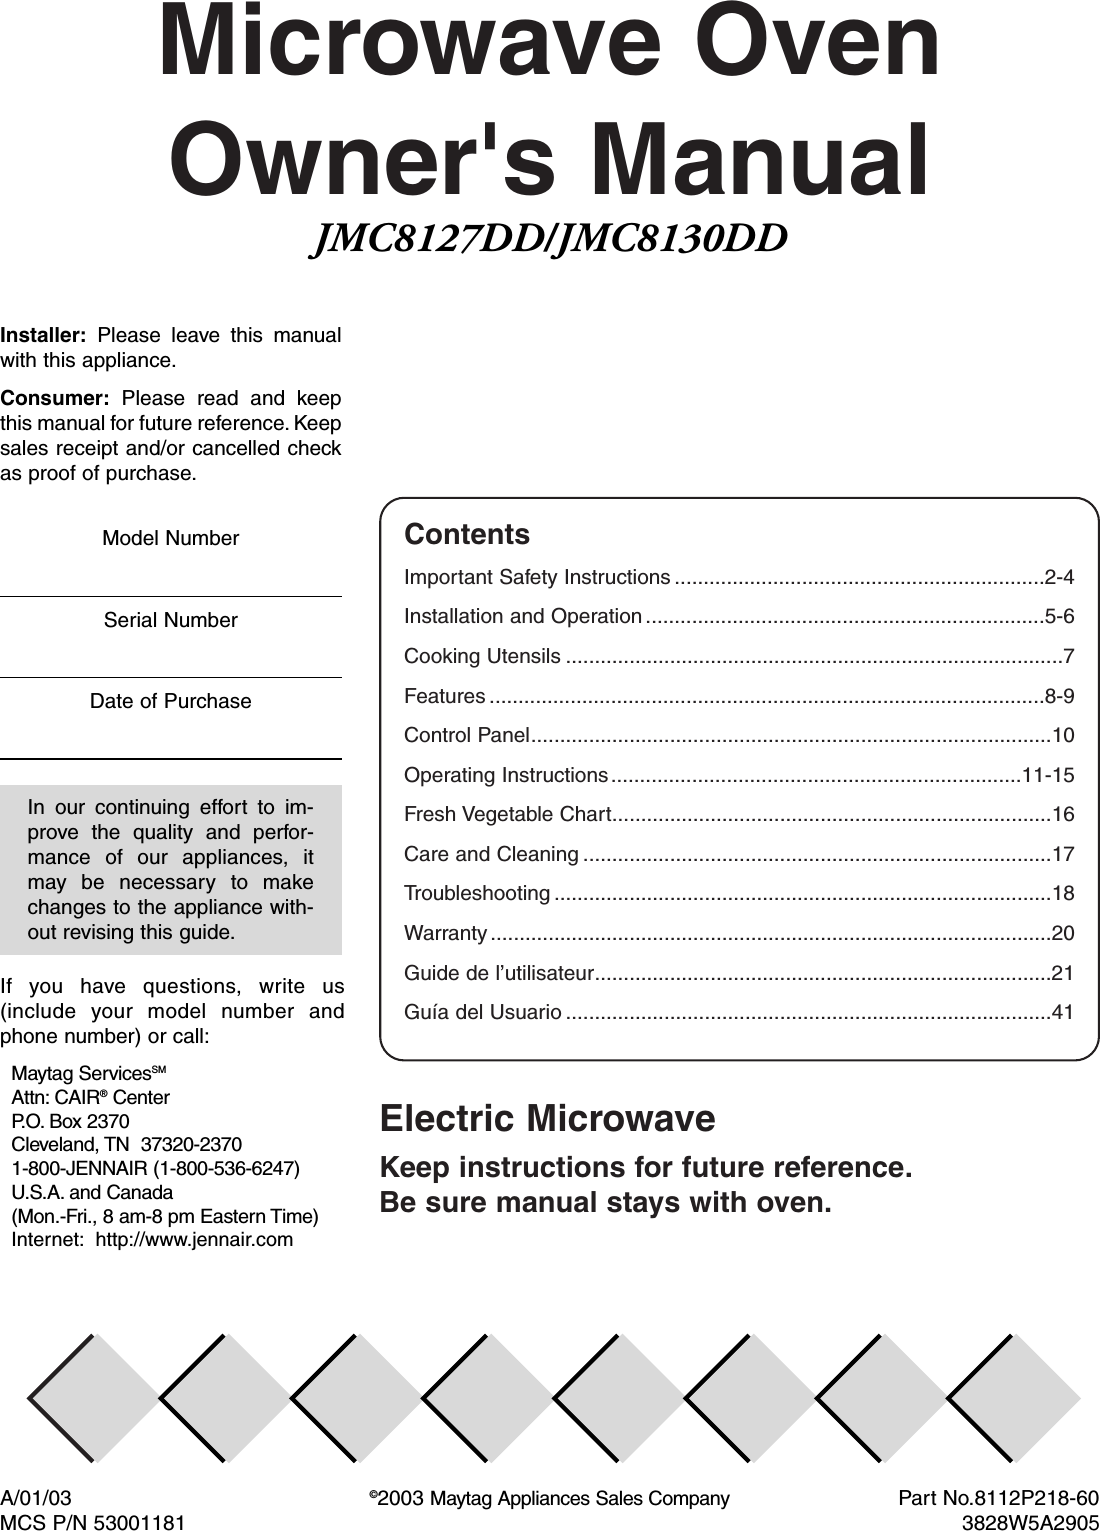 Microwave OvenOwner&apos;s ManualElectric MicrowaveKeep instructions for future reference.Be sure manual stays with oven.ContentsImportant Safety Instructions ................................................................2-4Installation and Operation .....................................................................5-6Cooking Utensils ......................................................................................7Features ................................................................................................8-9Control Panel..........................................................................................10Operating Instructions.......................................................................11-15Fresh Vegetable Chart............................................................................16Care and Cleaning .................................................................................17Troubleshooting ......................................................................................18Warranty .................................................................................................20Guide de l’utilisateur...............................................................................21Guía del Usuario ....................................................................................41A/01/03 ©2003 Maytag Appliances Sales Company  Part No.8112P218-60MCS P/N 53001181 3828W5A2905Installer: Please leave this manualwith this appliance.Consumer: Please read and keepthis manual for future reference. Keepsales receipt and/or cancelled checkas proof of purchase.In our continuing effort to im-prove the quality and perfor-mance of our appliances, itmay be necessary to makechanges to the appliance with-out revising this guide.Model NumberSerial NumberDate of PurchaseIf you have questions, write us(include your model number andphone number) or call:Maytag ServicesSMAttn: CAIR®CenterP. O. Box 2370Cleveland, TN  37320-23701-800-JENNAIR (1-800-536-6247)U.S.A. and Canada(Mon.-Fri., 8 am-8 pm Eastern Time)Internet: http://www.jennair.comJMC8127DD/JMC8130DD